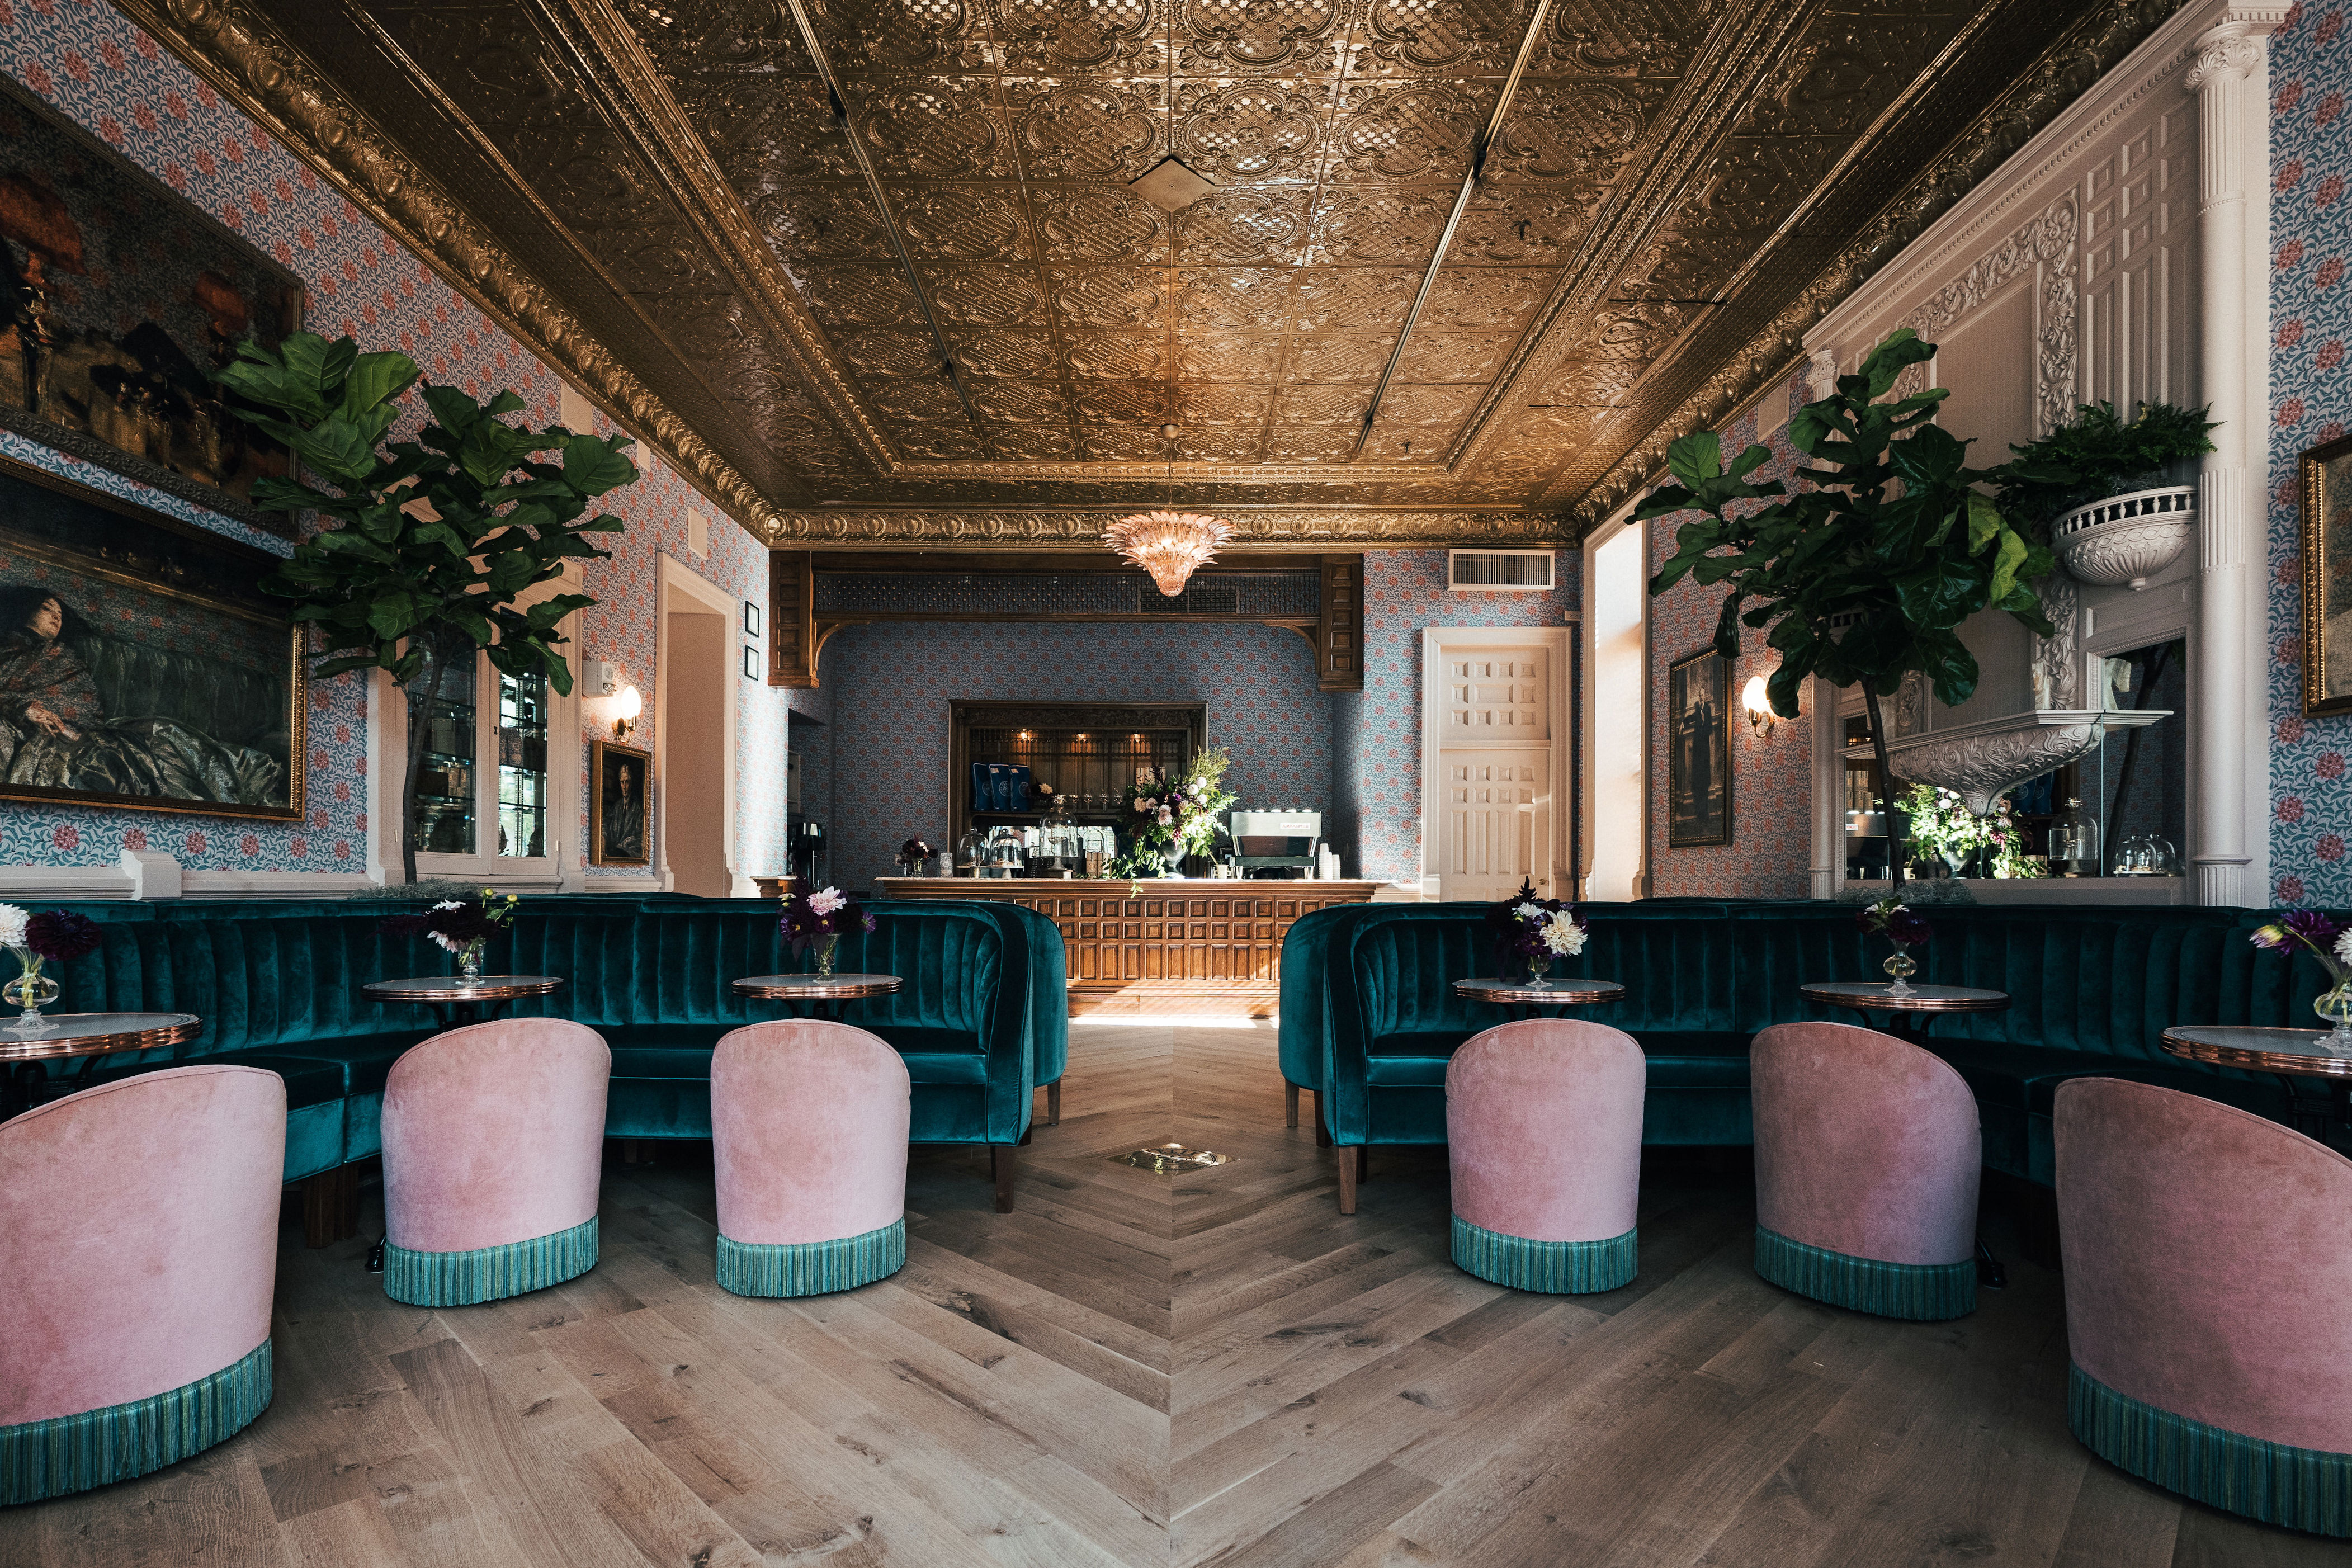 Few interior designers do maximalism quite like San Francisco–based mastermind Ken Fulk, and <a href="https://aubergeresorts.com/hoteljerome/dine/felix-roasting-co/">Felix Roasting Co.</a>—which neighbors Aspen’s Hotel Jerome—is proof. The space, with its glowing ceiling, jewel-toned velvet seating, and Murano glass fixture, is a celebration of tamed opulence. The menu is just as bold, with drinks like the s’mores latte served in a martini glass and adorned with a roasted marshmallow.<p>Sign up for our newsletter to get the latest in design, decorating, celebrity style, shopping, and more.</p><a href="https://www.architecturaldigest.com/newsletter/subscribe?sourceCode=msnsend">Sign Up Now</a>